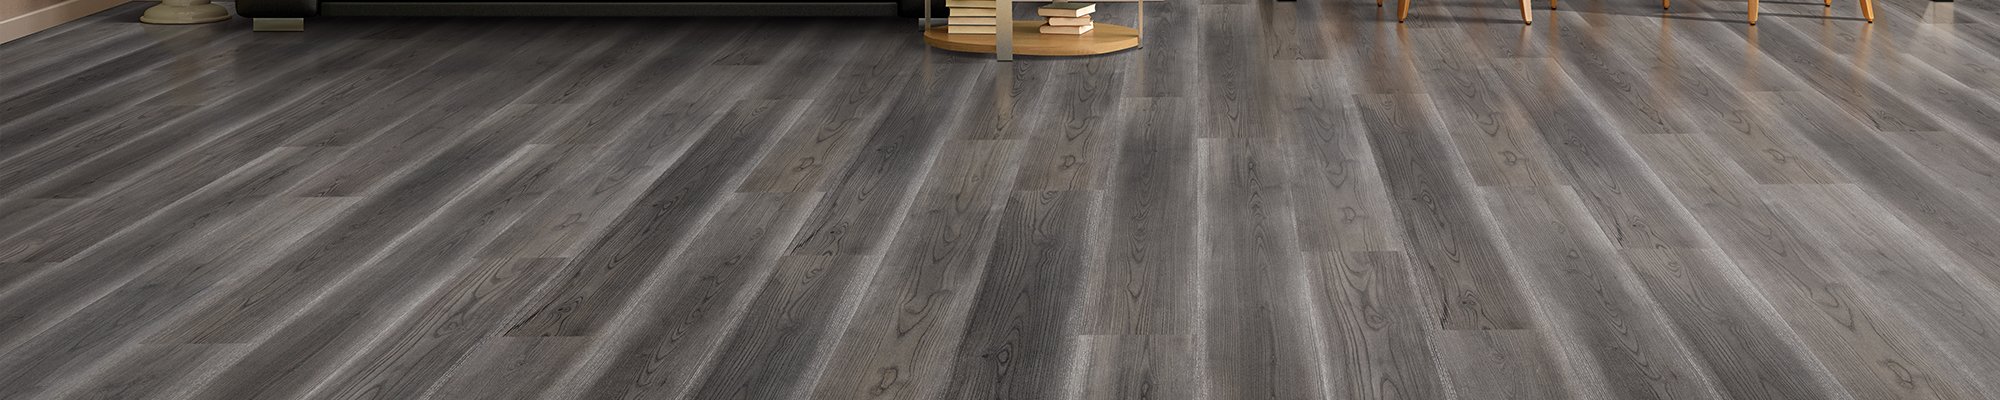 Laminate Flooring Info Lonsdale Flooring in North Vancouver, BC